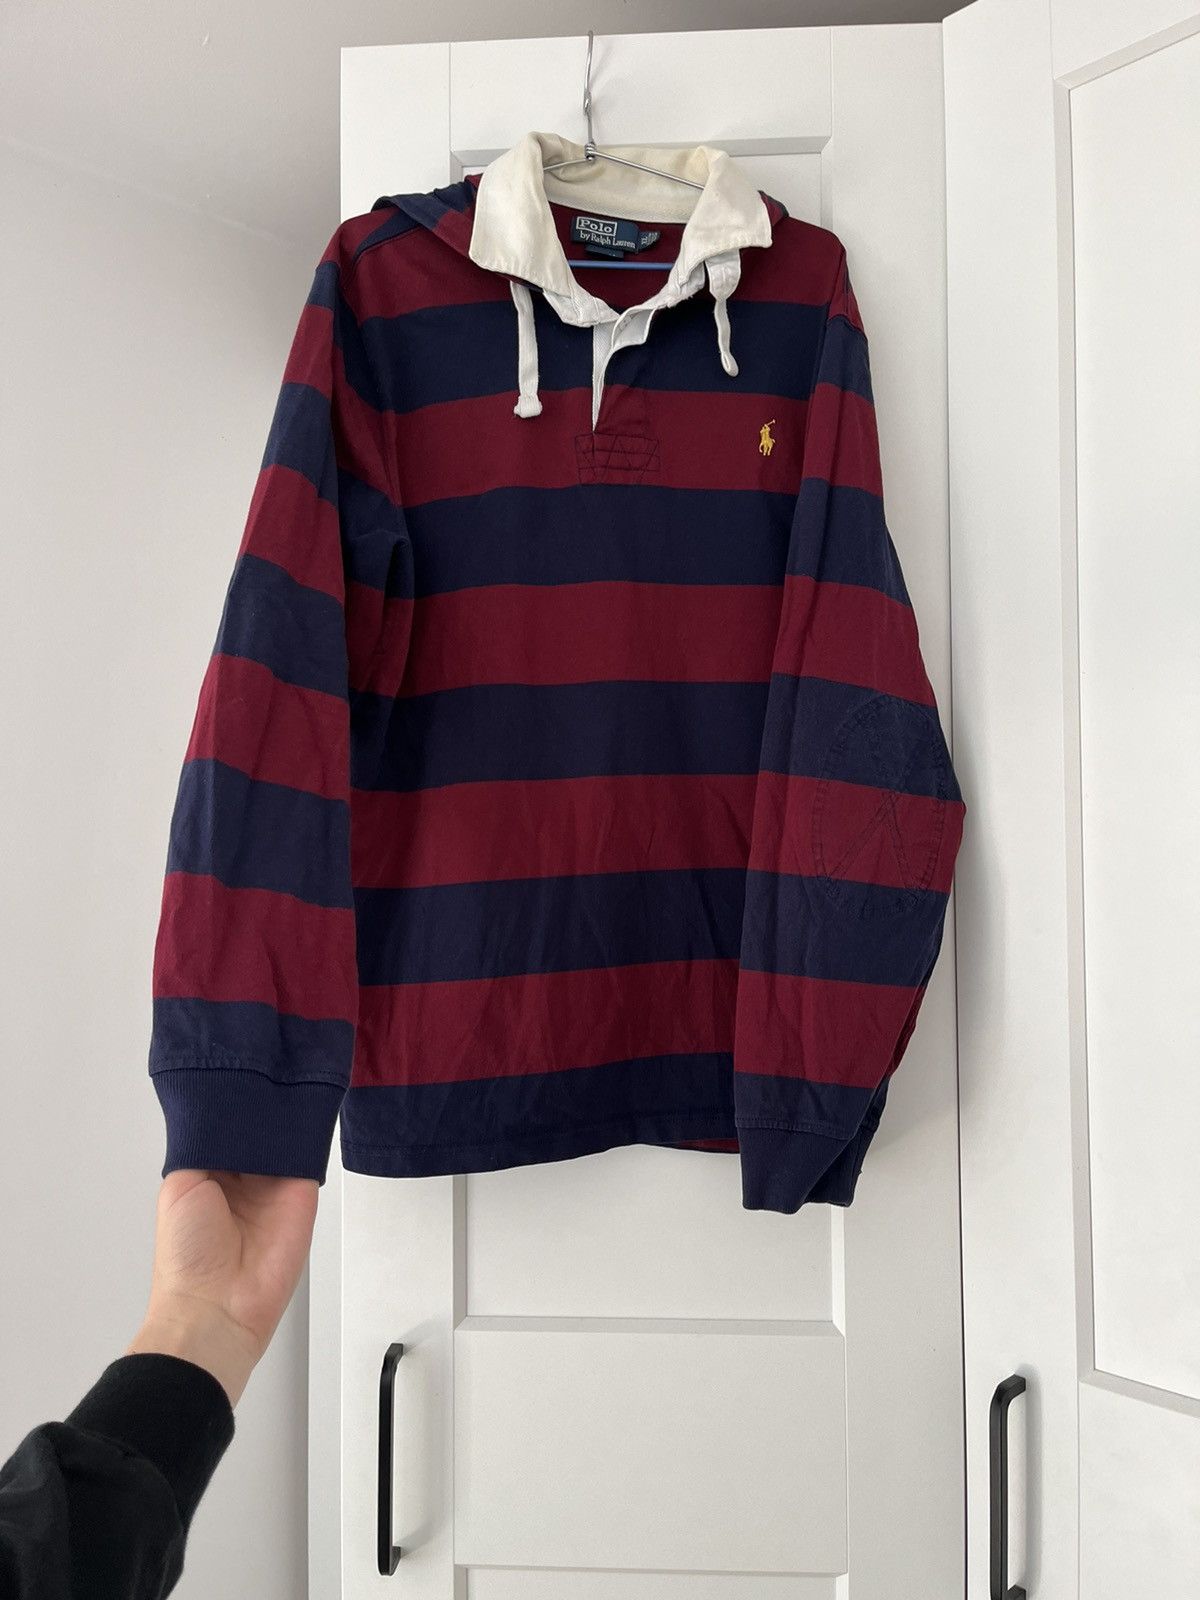 Pre-owned Polo Ralph Lauren X Ralph Lauren Polo Ralph Laurent Vintage Rugby Shirt Striped 90s